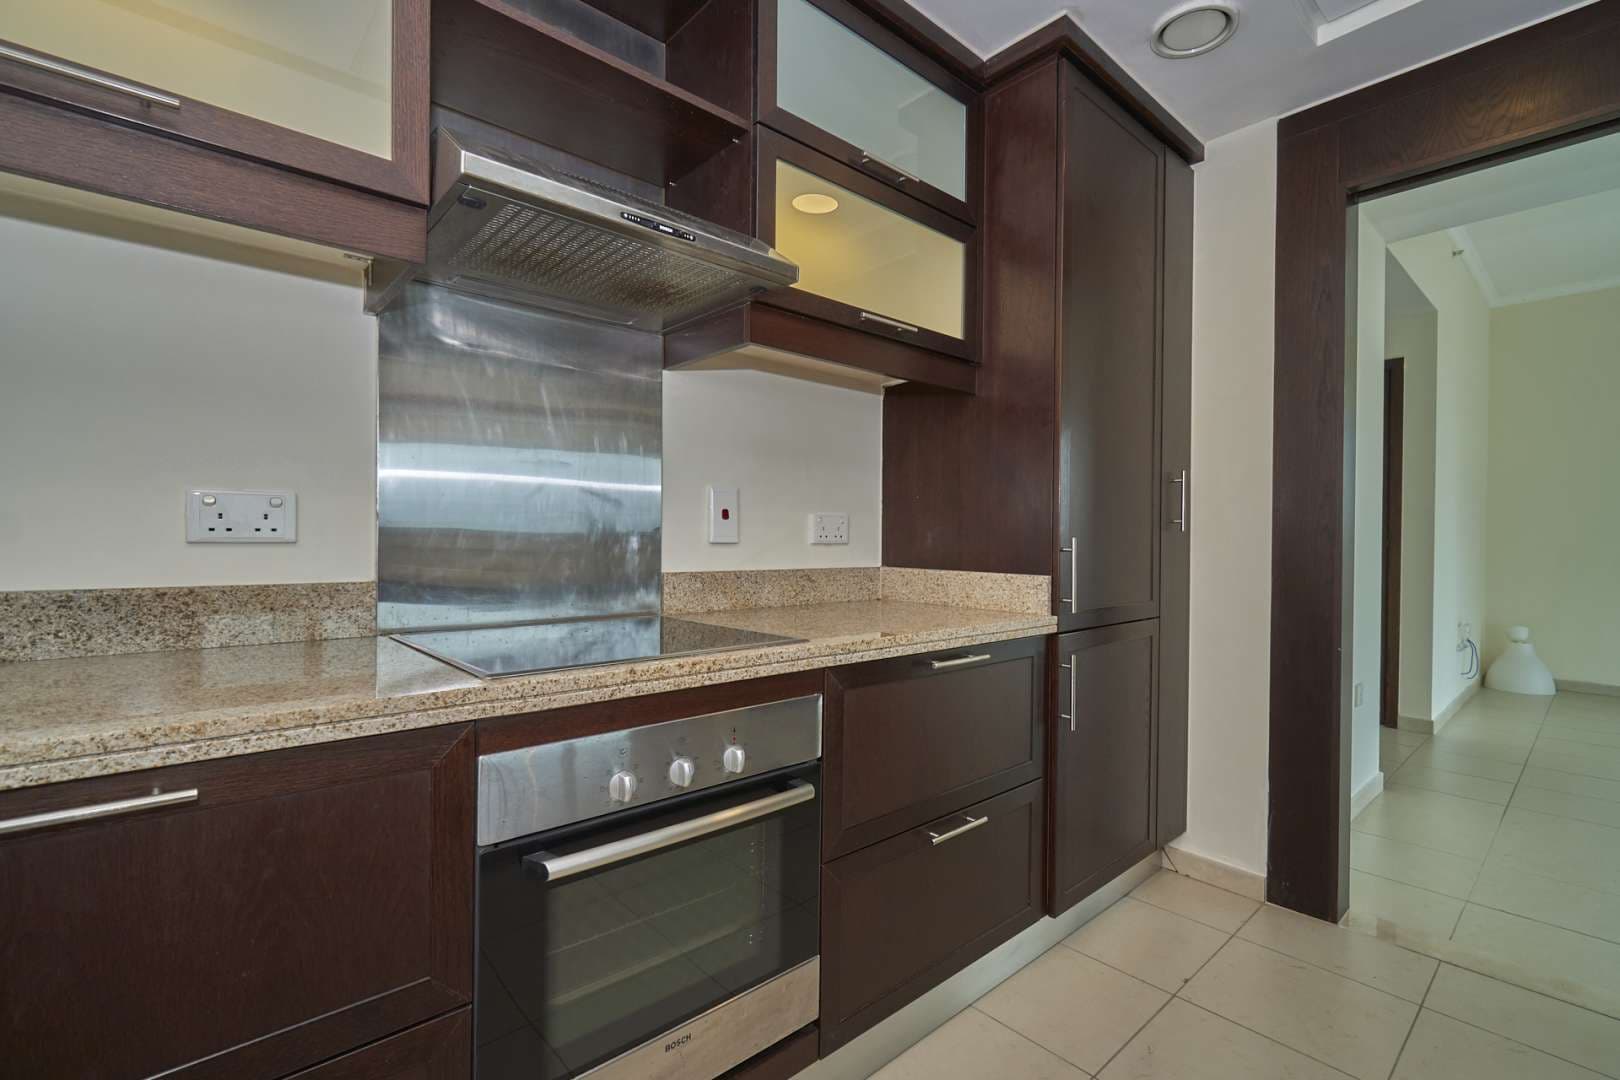 1 Bedroom Apartment For Rent The Residences Lp11596 23ea4411a4240600.jpg